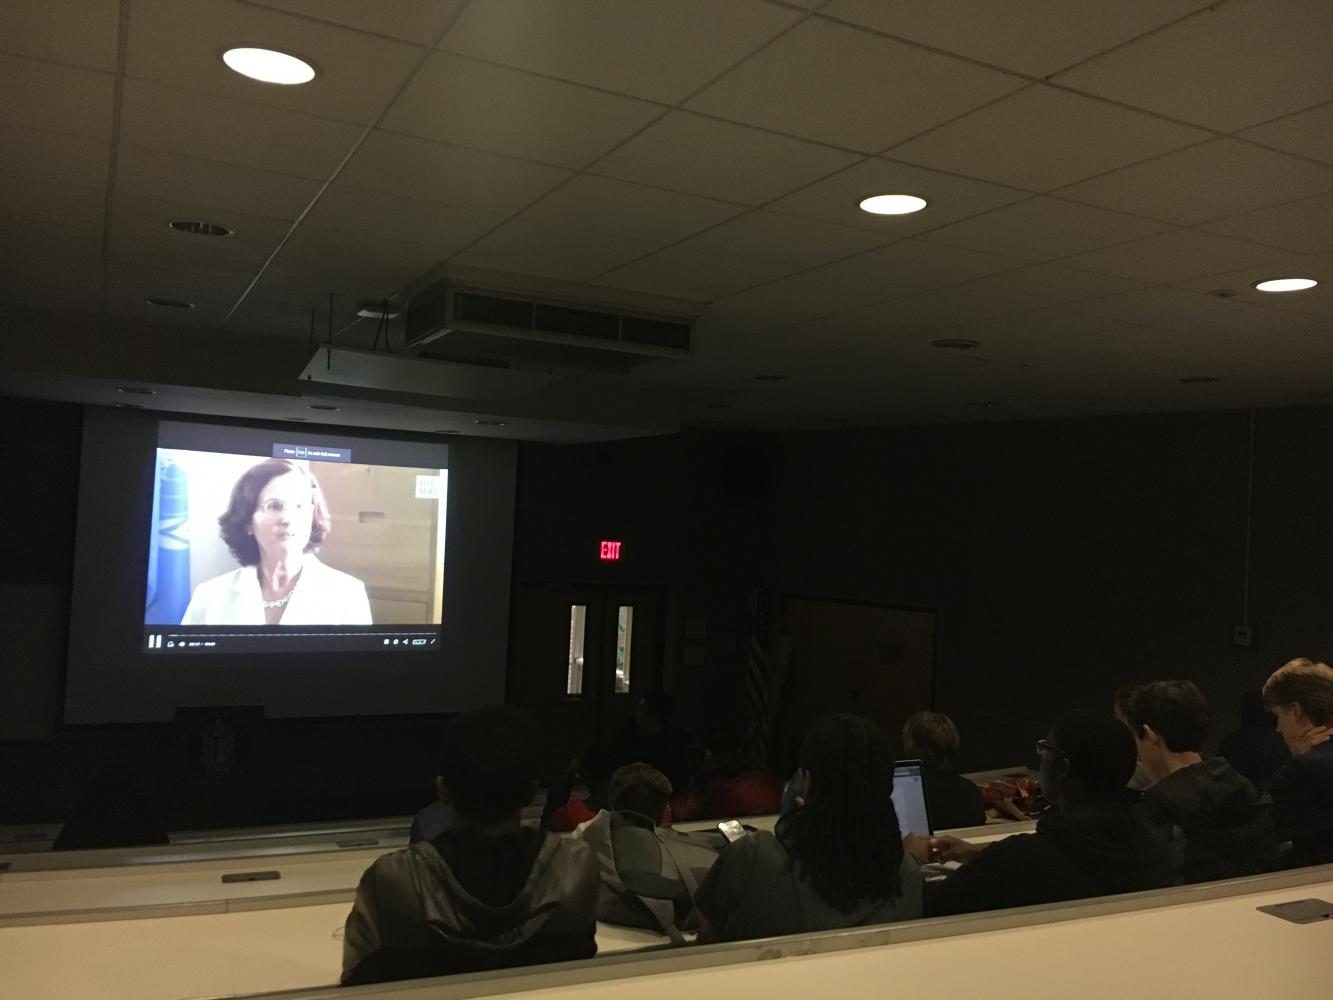 The students attentively watch the documentary on the Rohingya in Myanmar.